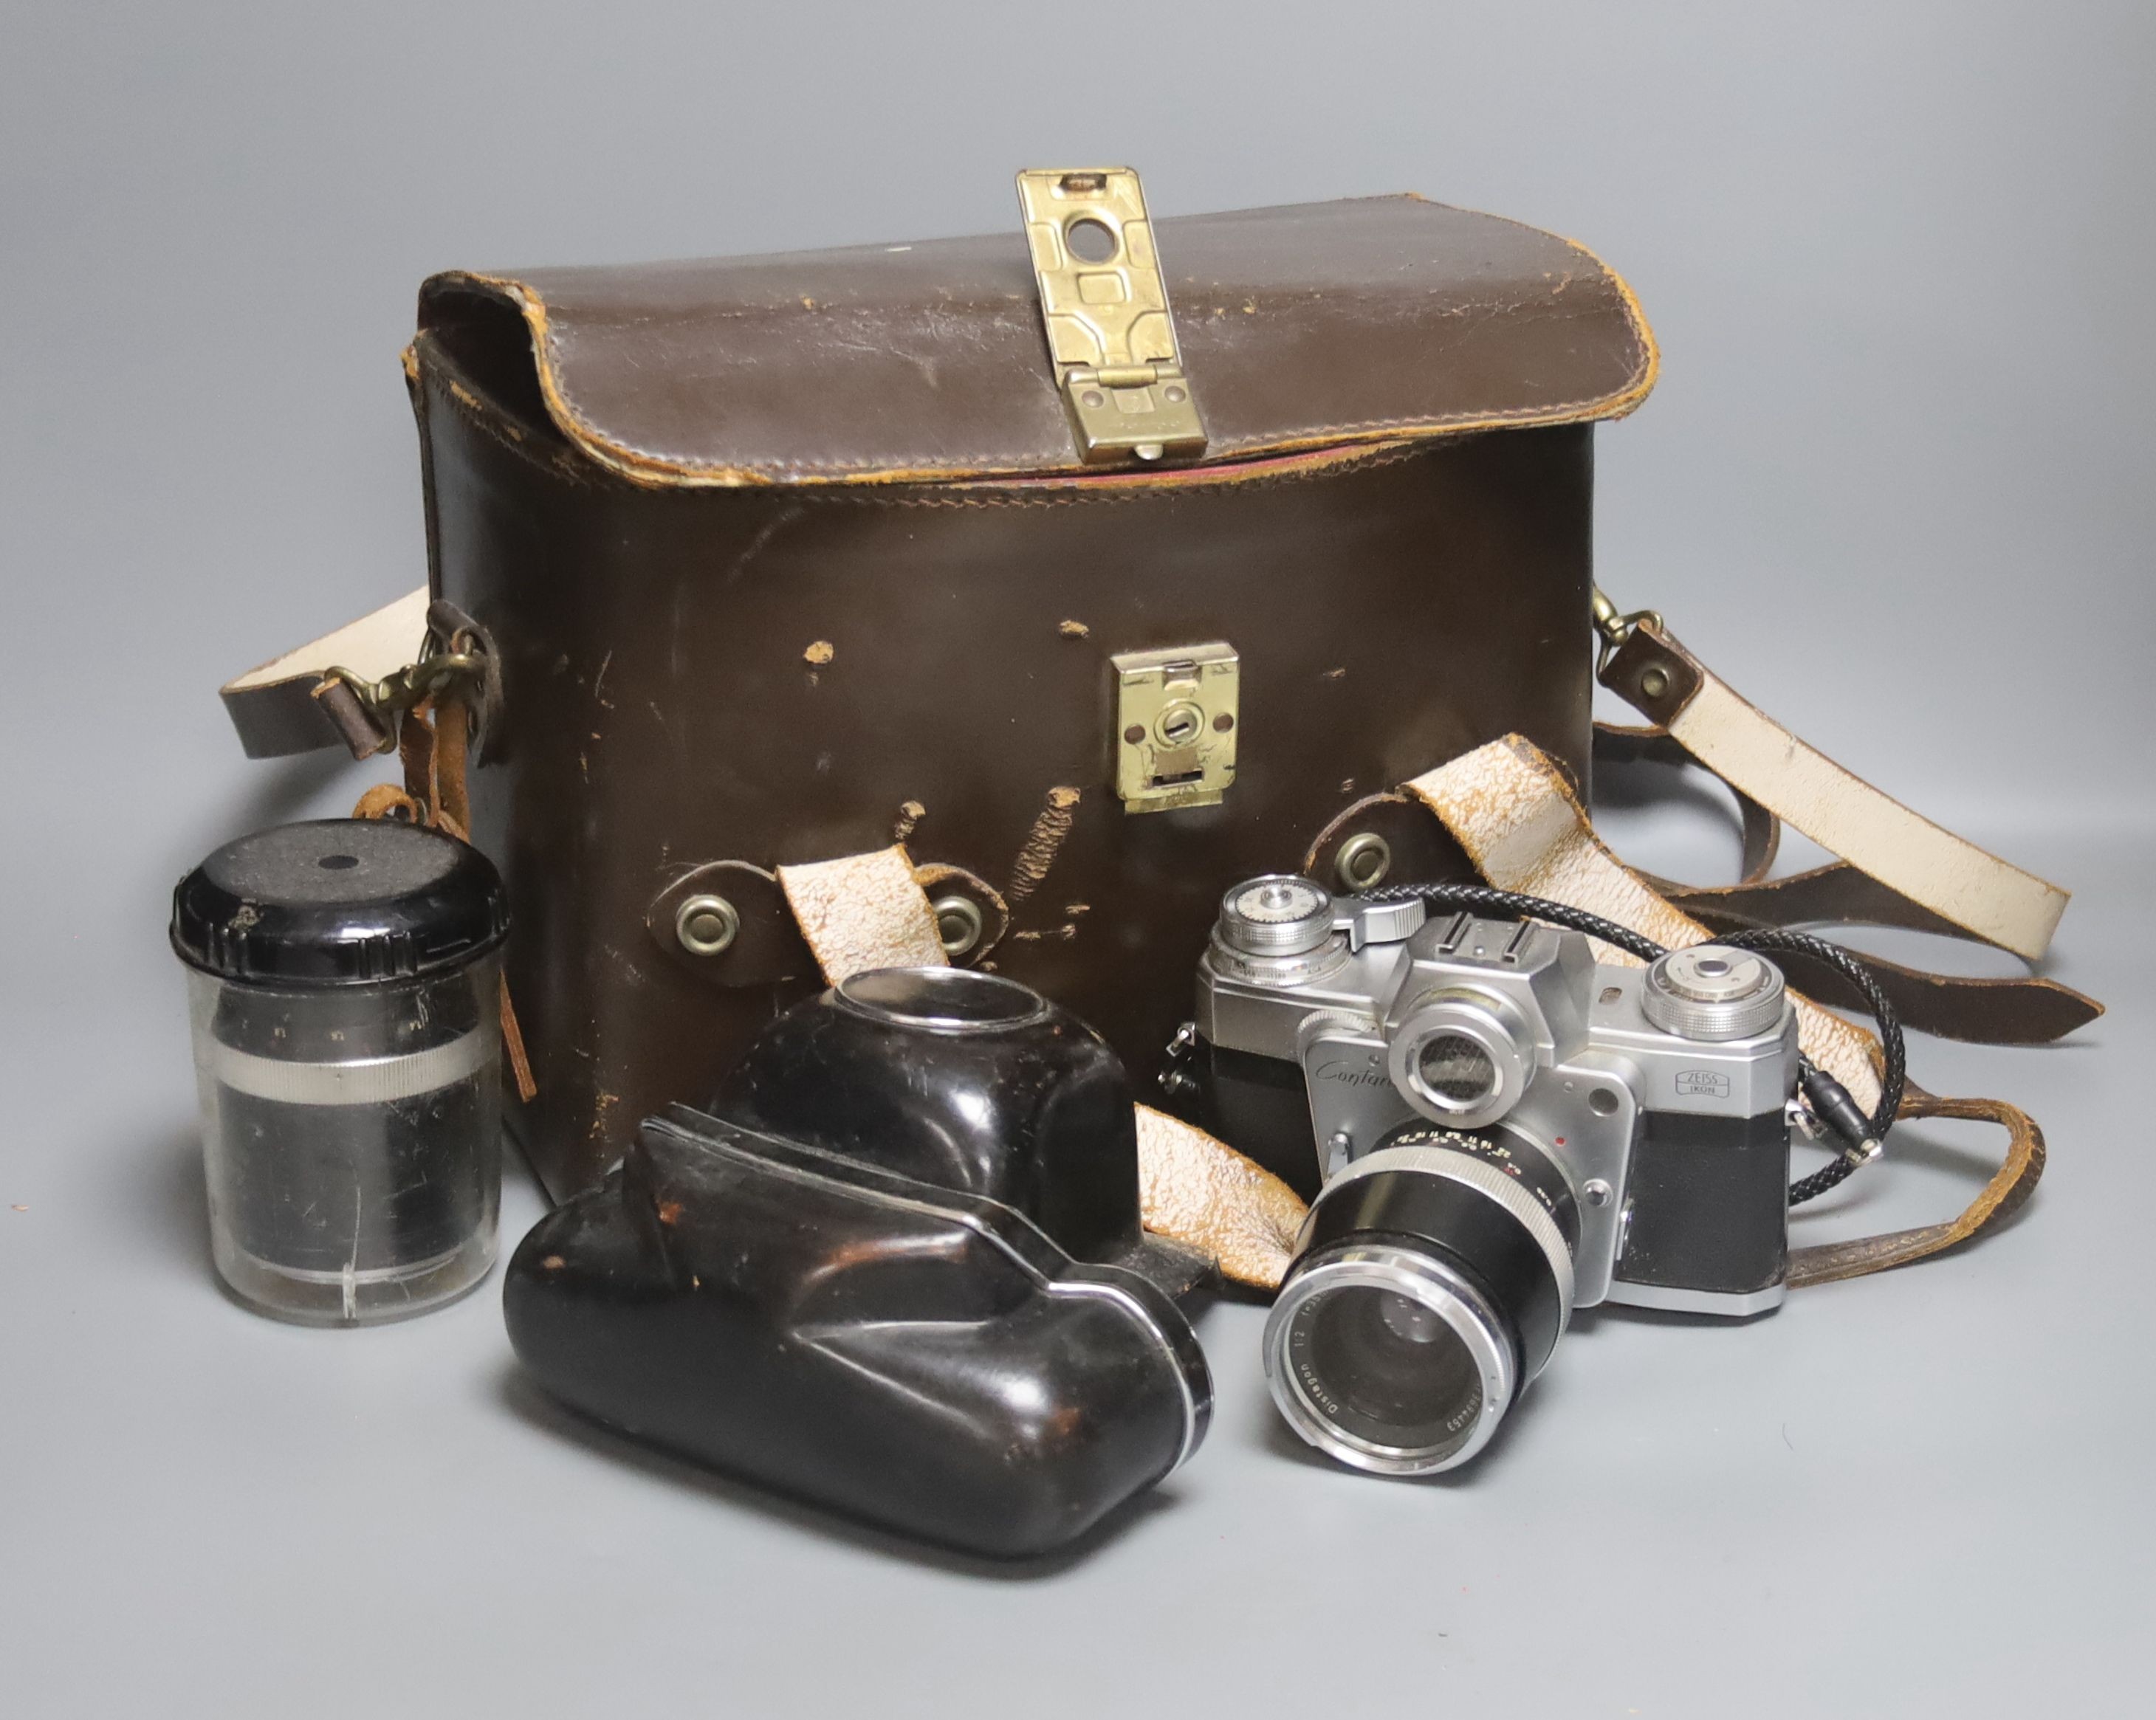 A Zeiss Ikon Contarex camera and accessories